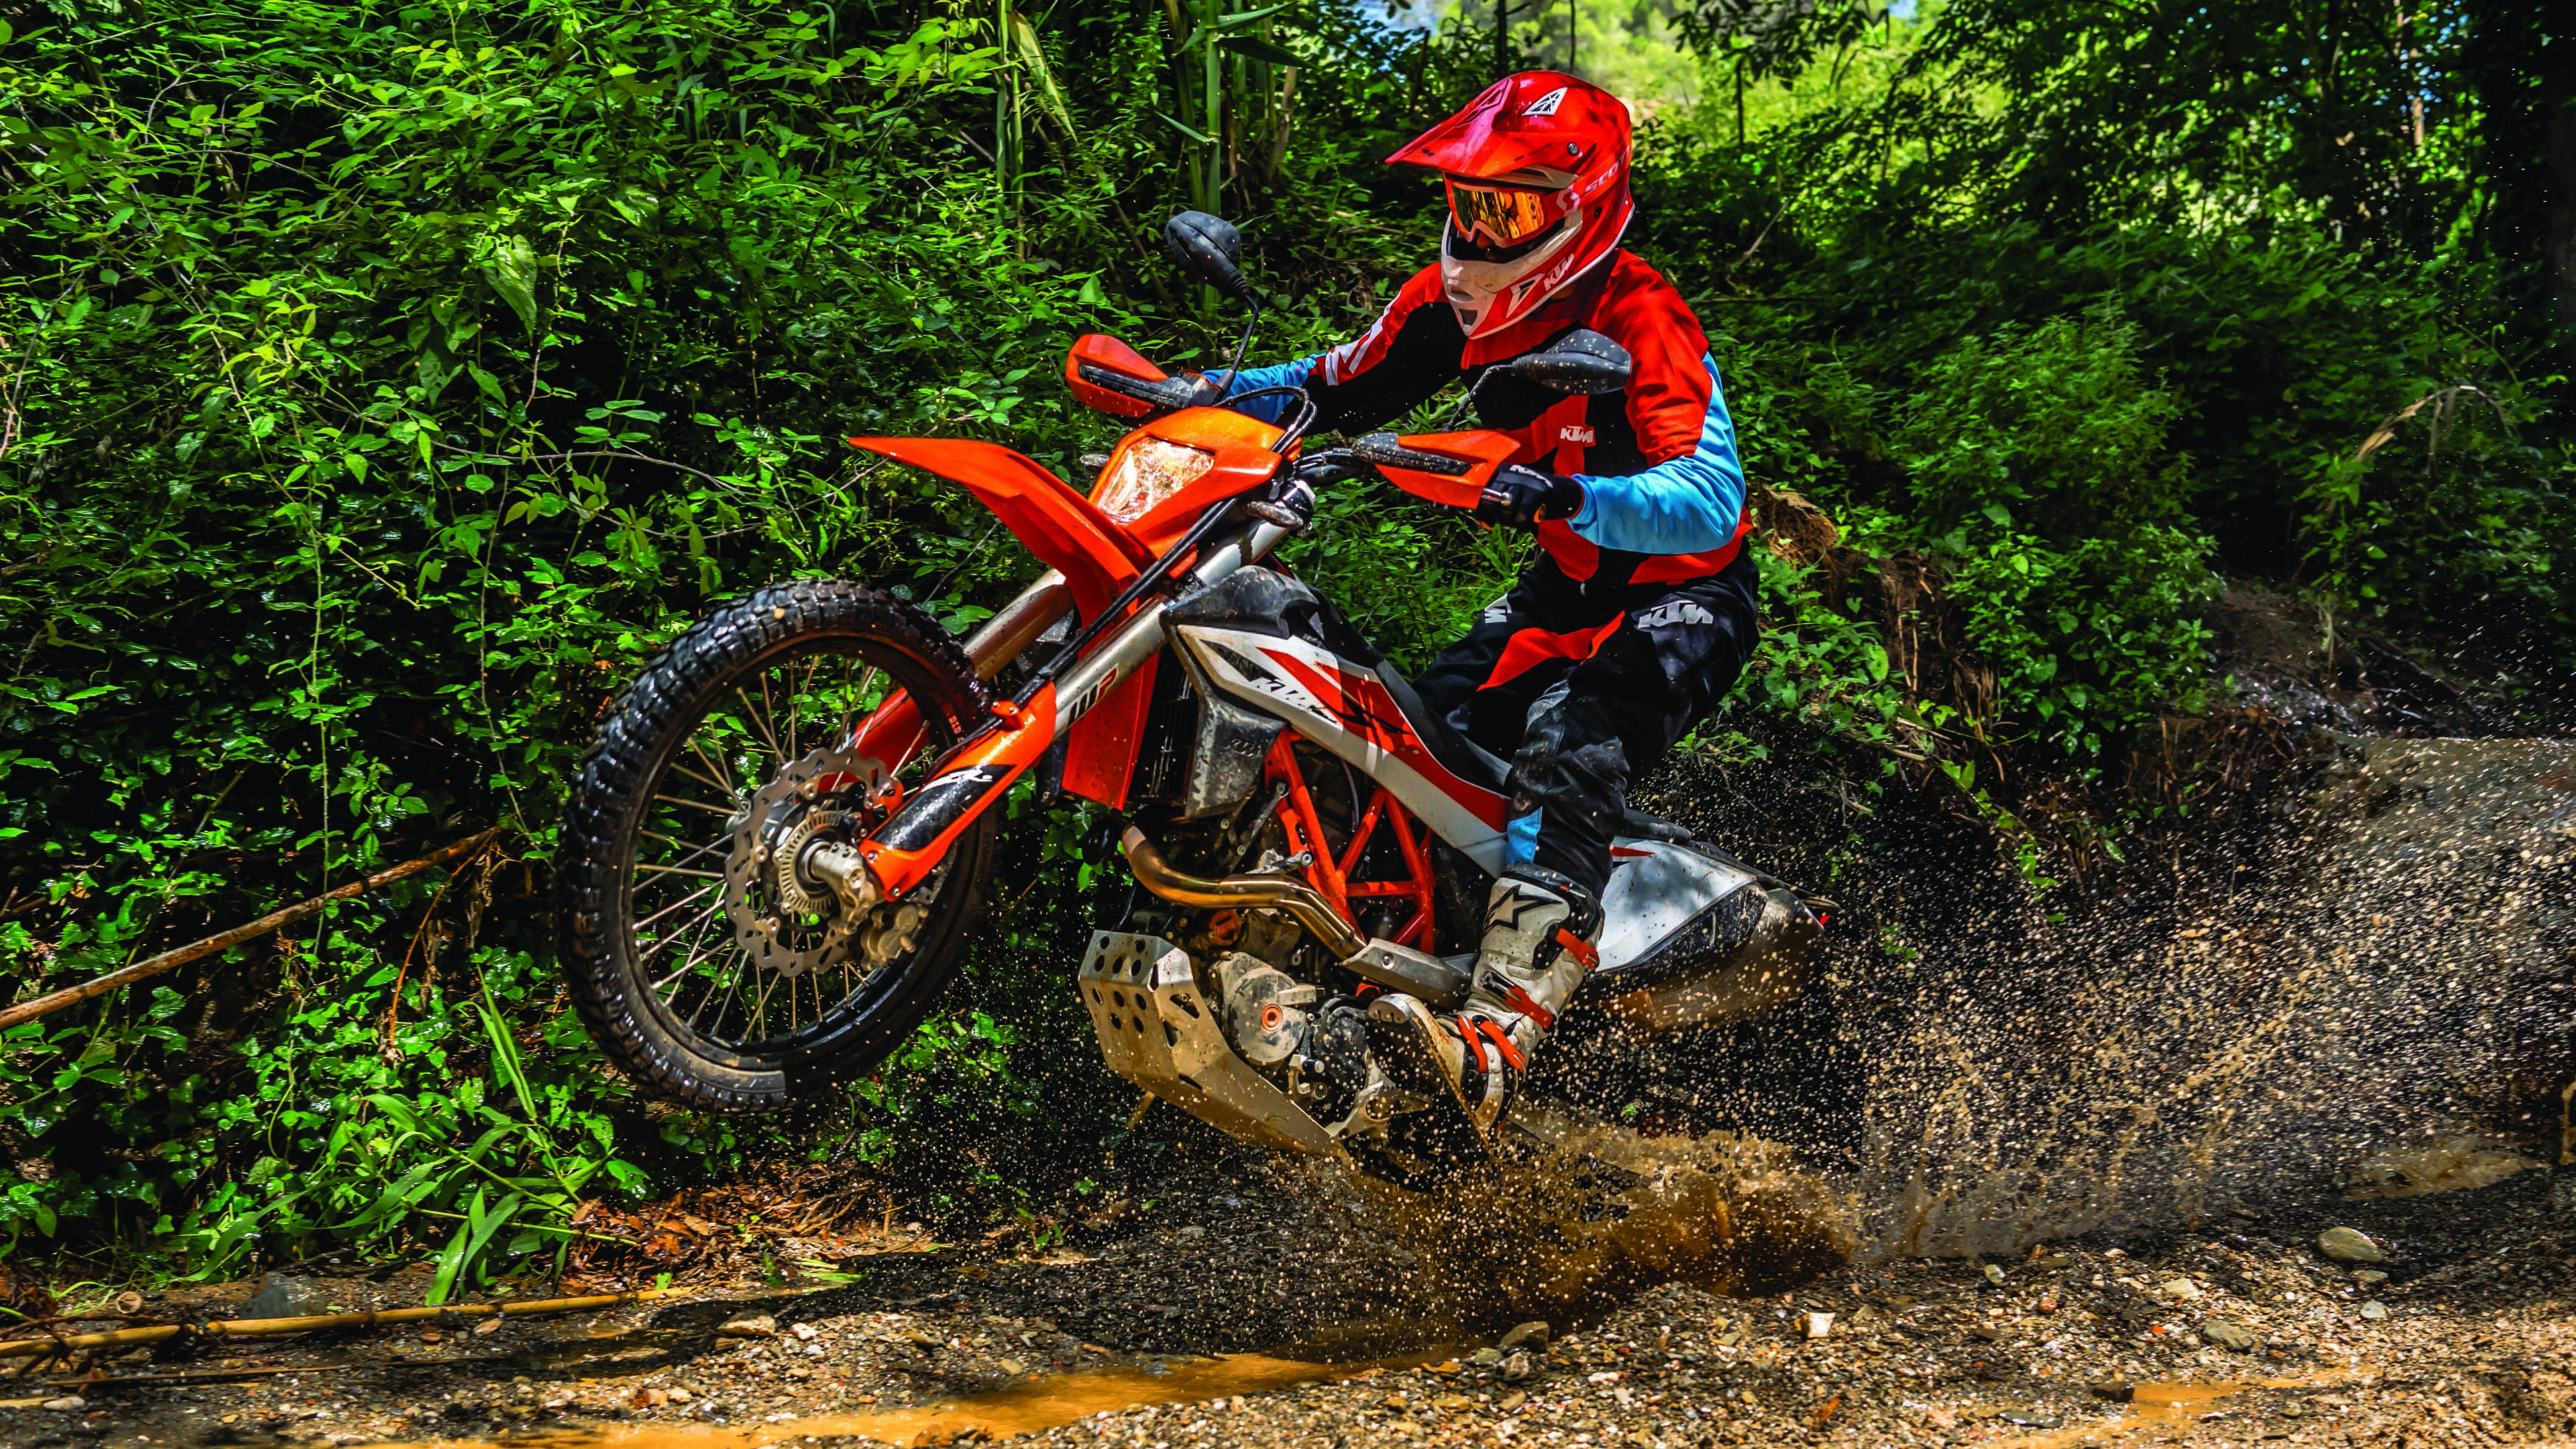 Enduro Motorbike: KTM Dirt Bike, Jungle Race, Motorcyclist, The River Obstacle, Off-road Racing. 3840x2160 4K Background.